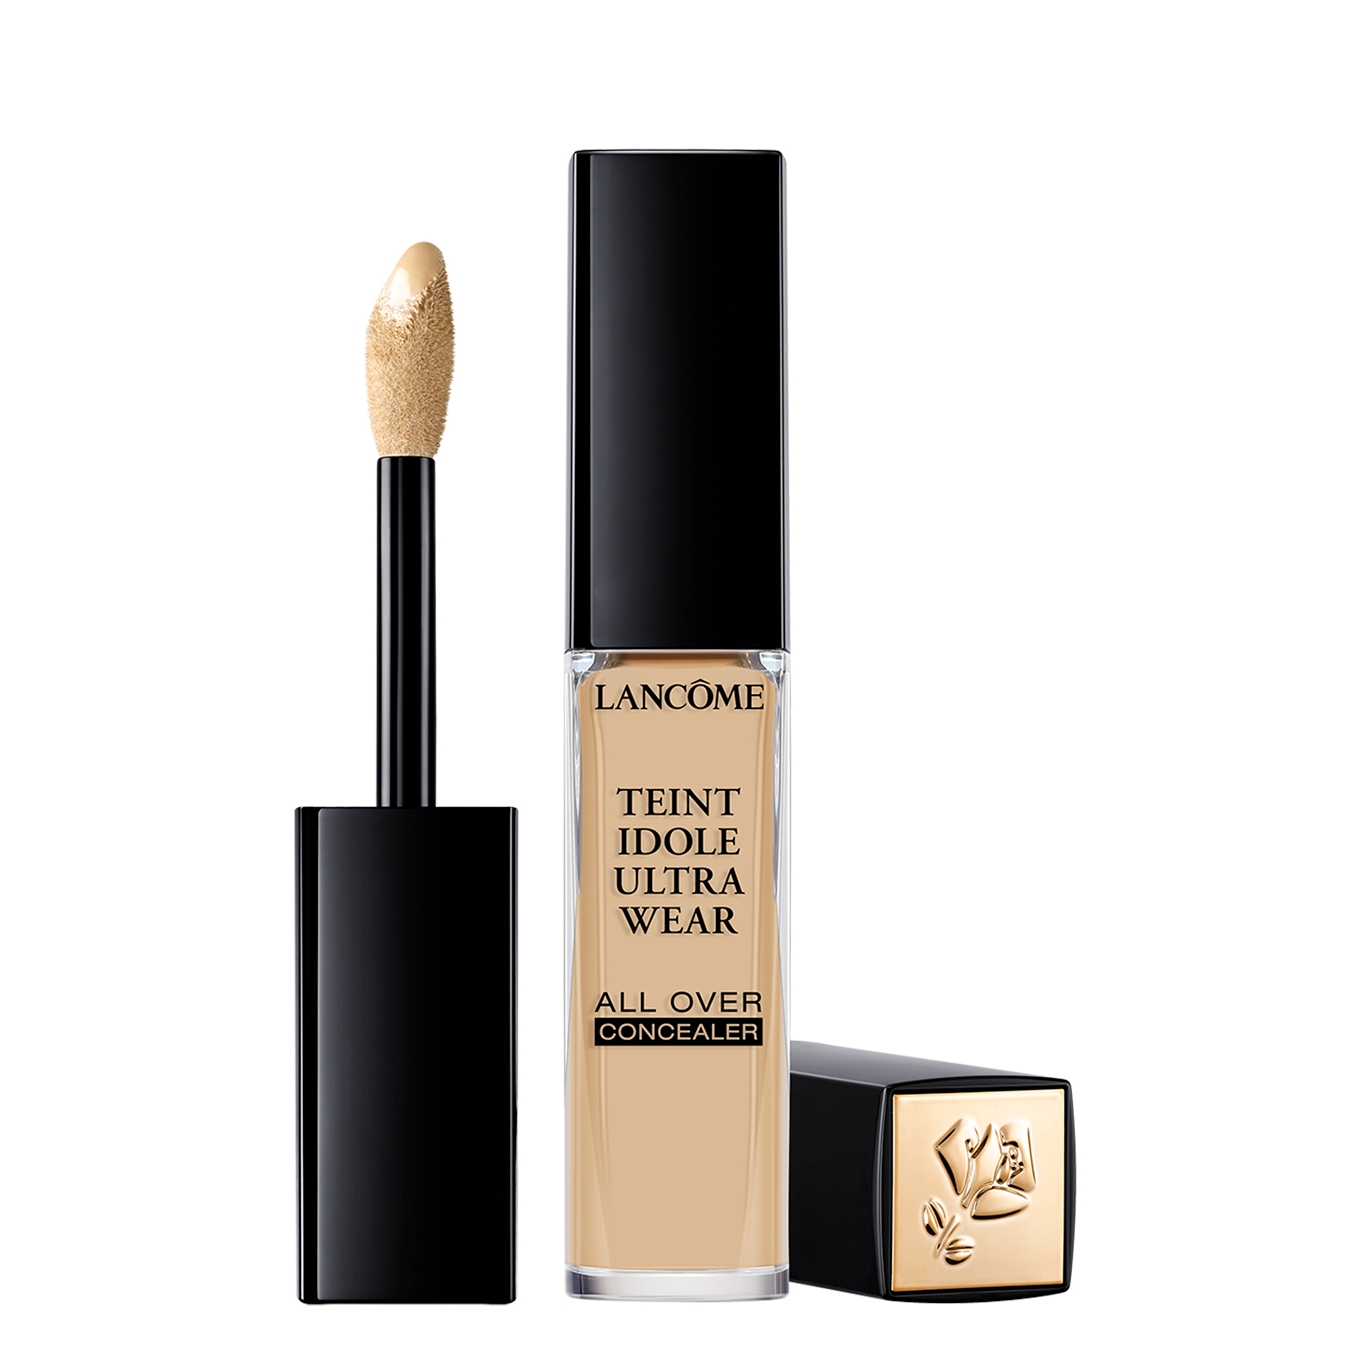 Lancôme Teint Idole Ultra Wear All Over Face Concealer In White